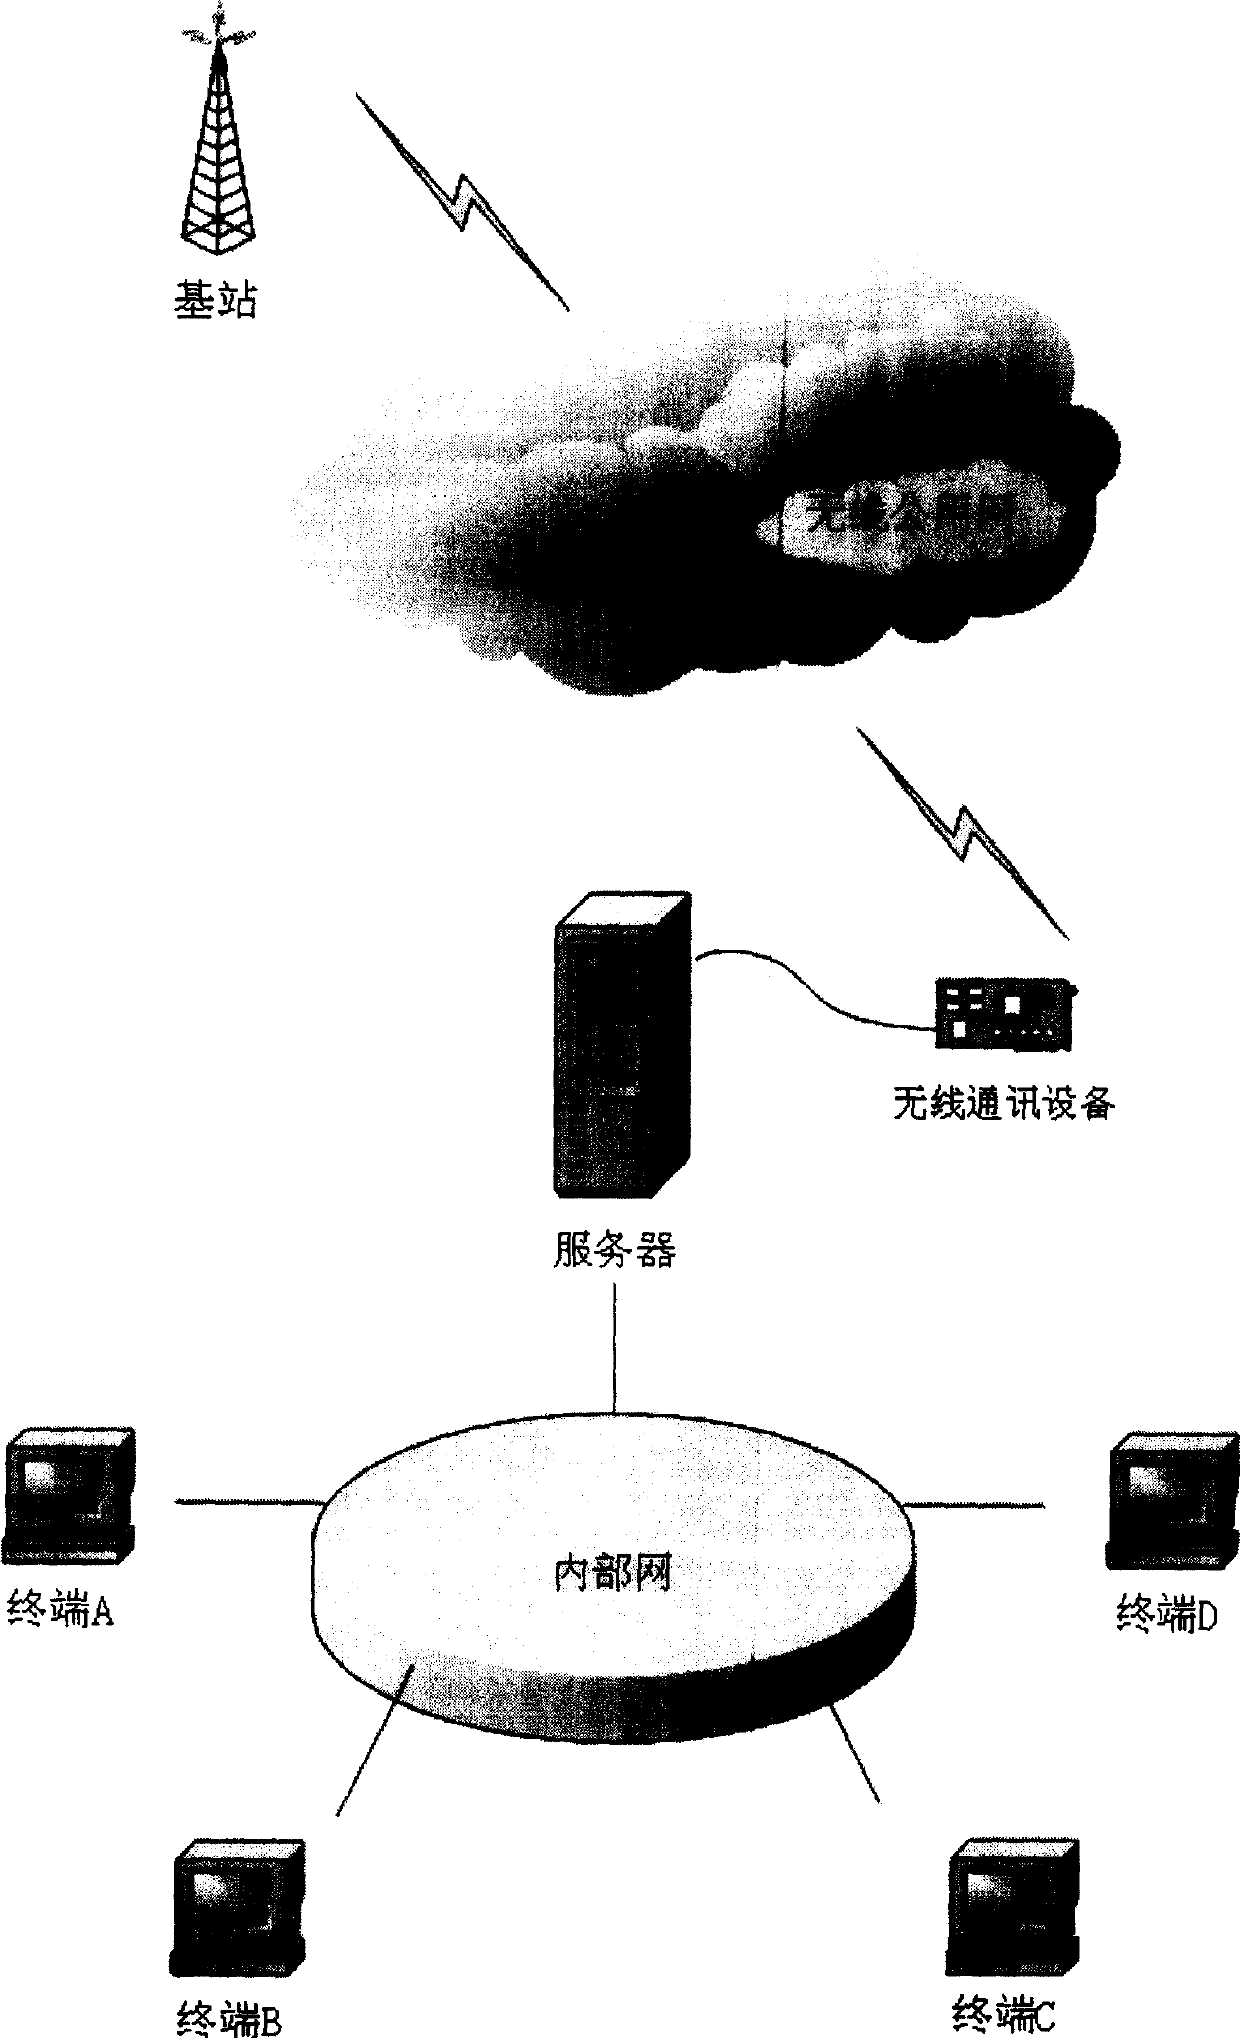 A method for receiving and transmitting short messages by multiple network terminals